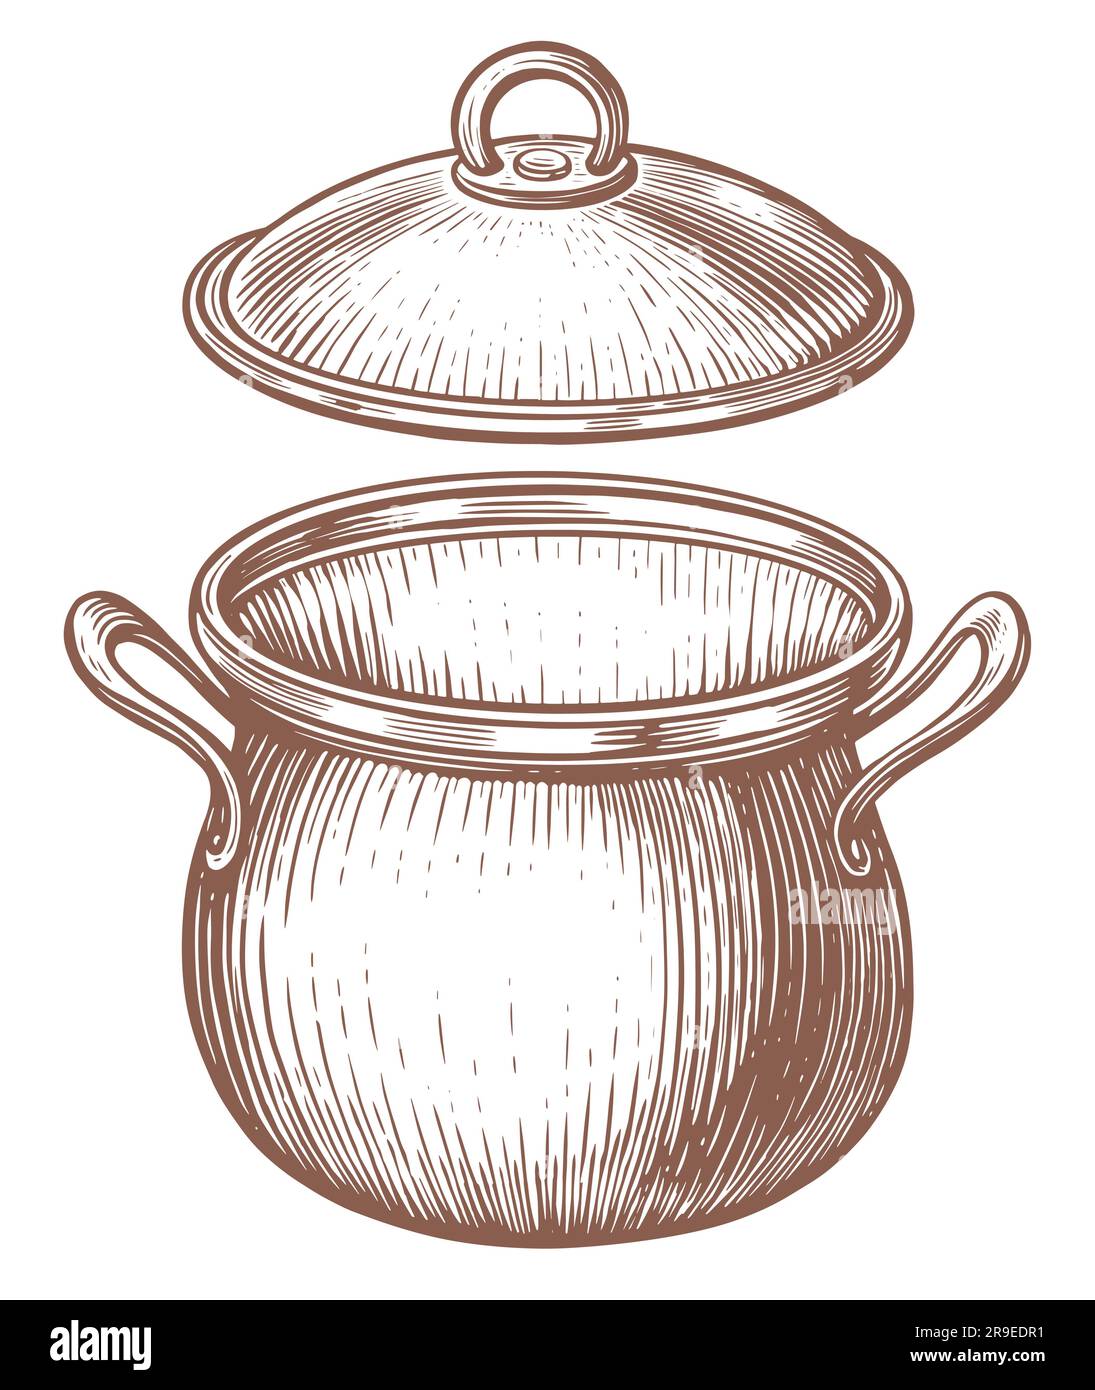 Saucepan with open lid. Kitchen pot. Hand drawn sketch vector illustration in vintage engraving style Stock Vector